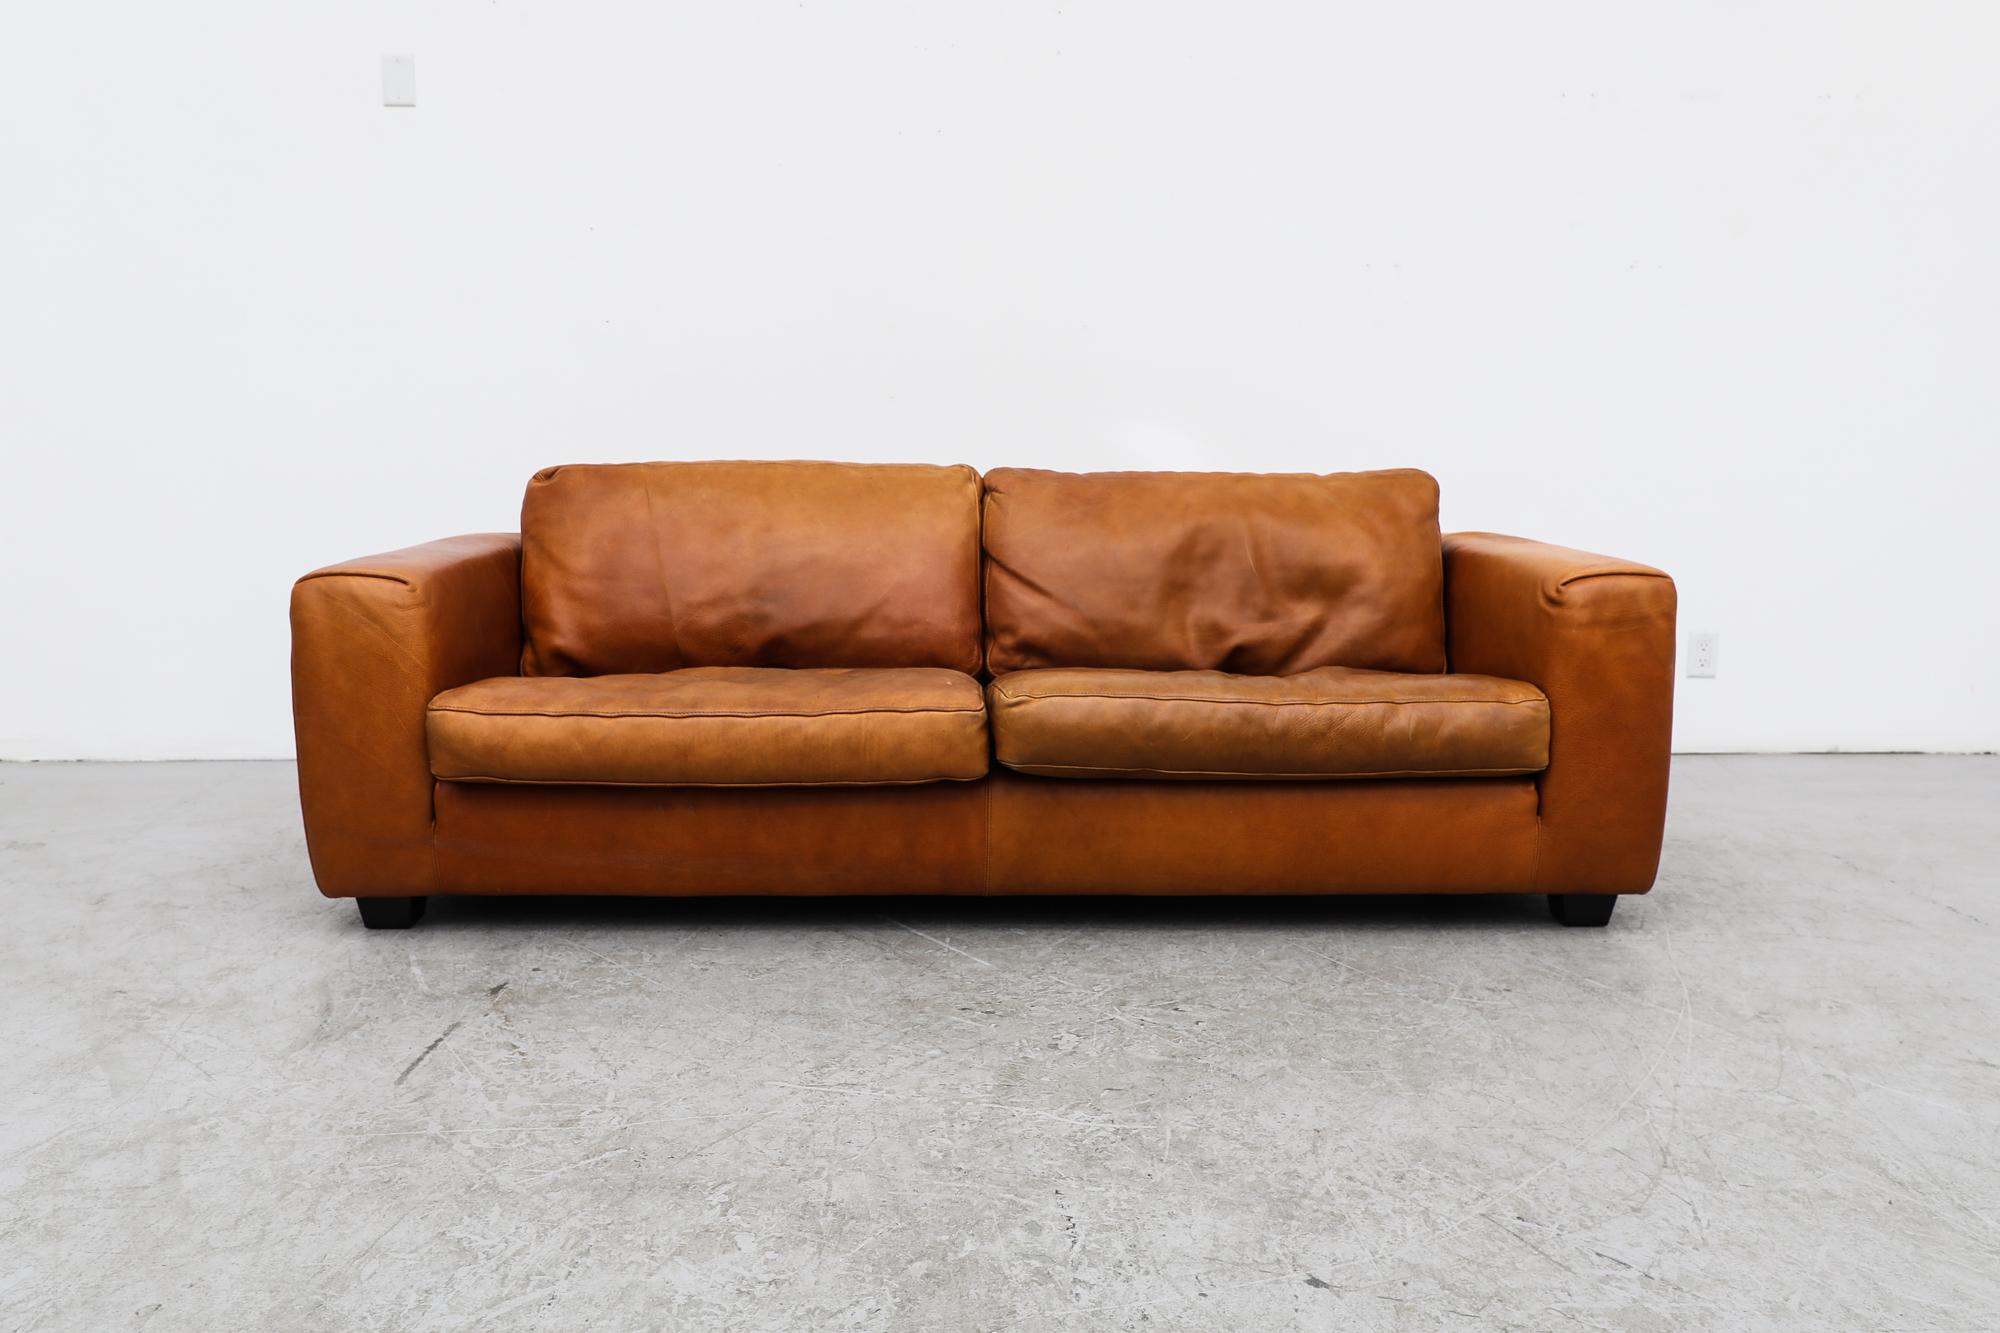 MOD Leather 3 seater 'Senza Tempo M' Sofa designed for the Dutch furniture company Linteloo Lab. Upholstered in a warm cognac leather with wide armrests and blocky wooden feet. In original condition with wear consistent with its age and use.